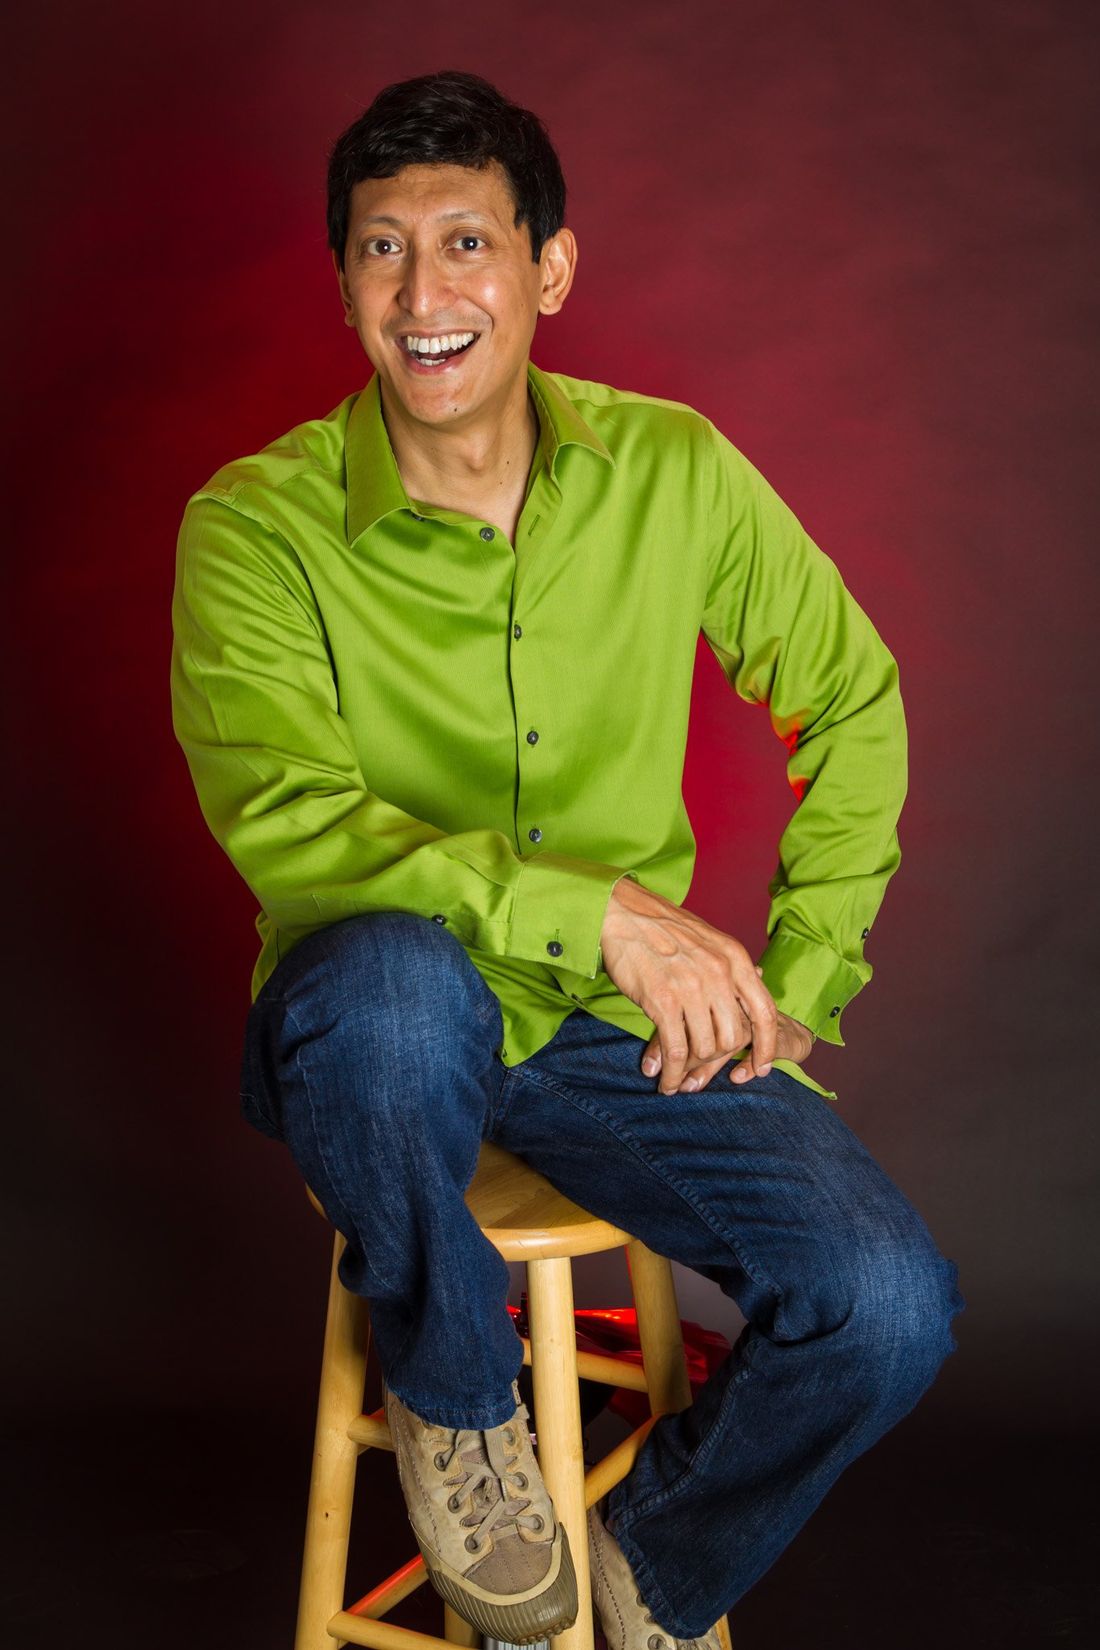 A studio portrait of a man in blue jeans and a green shirt sitting on a stool with a red background against a white background